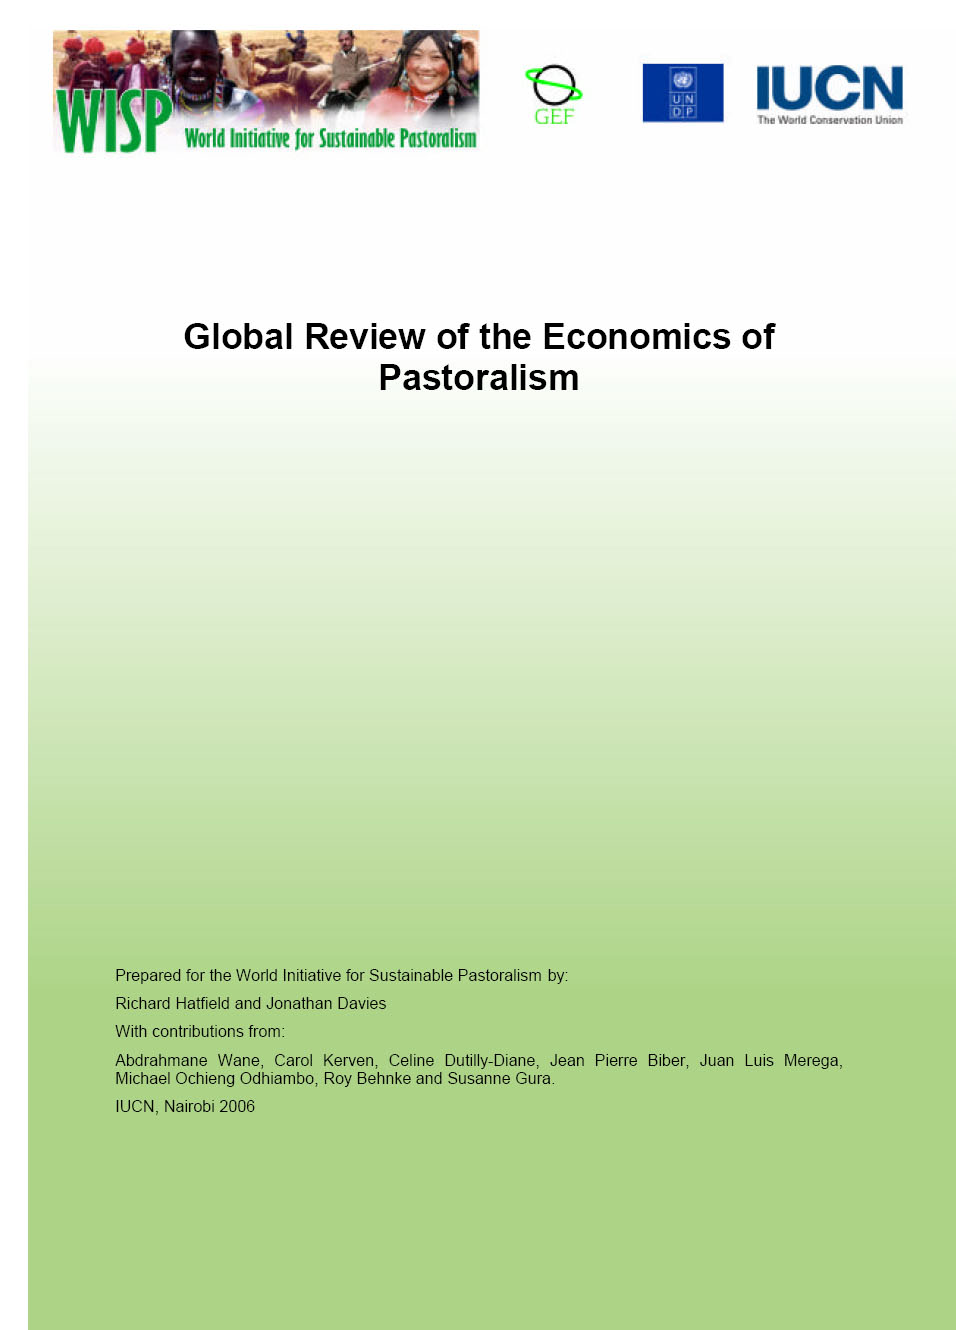 Global Review of the Economics of Pastoralism